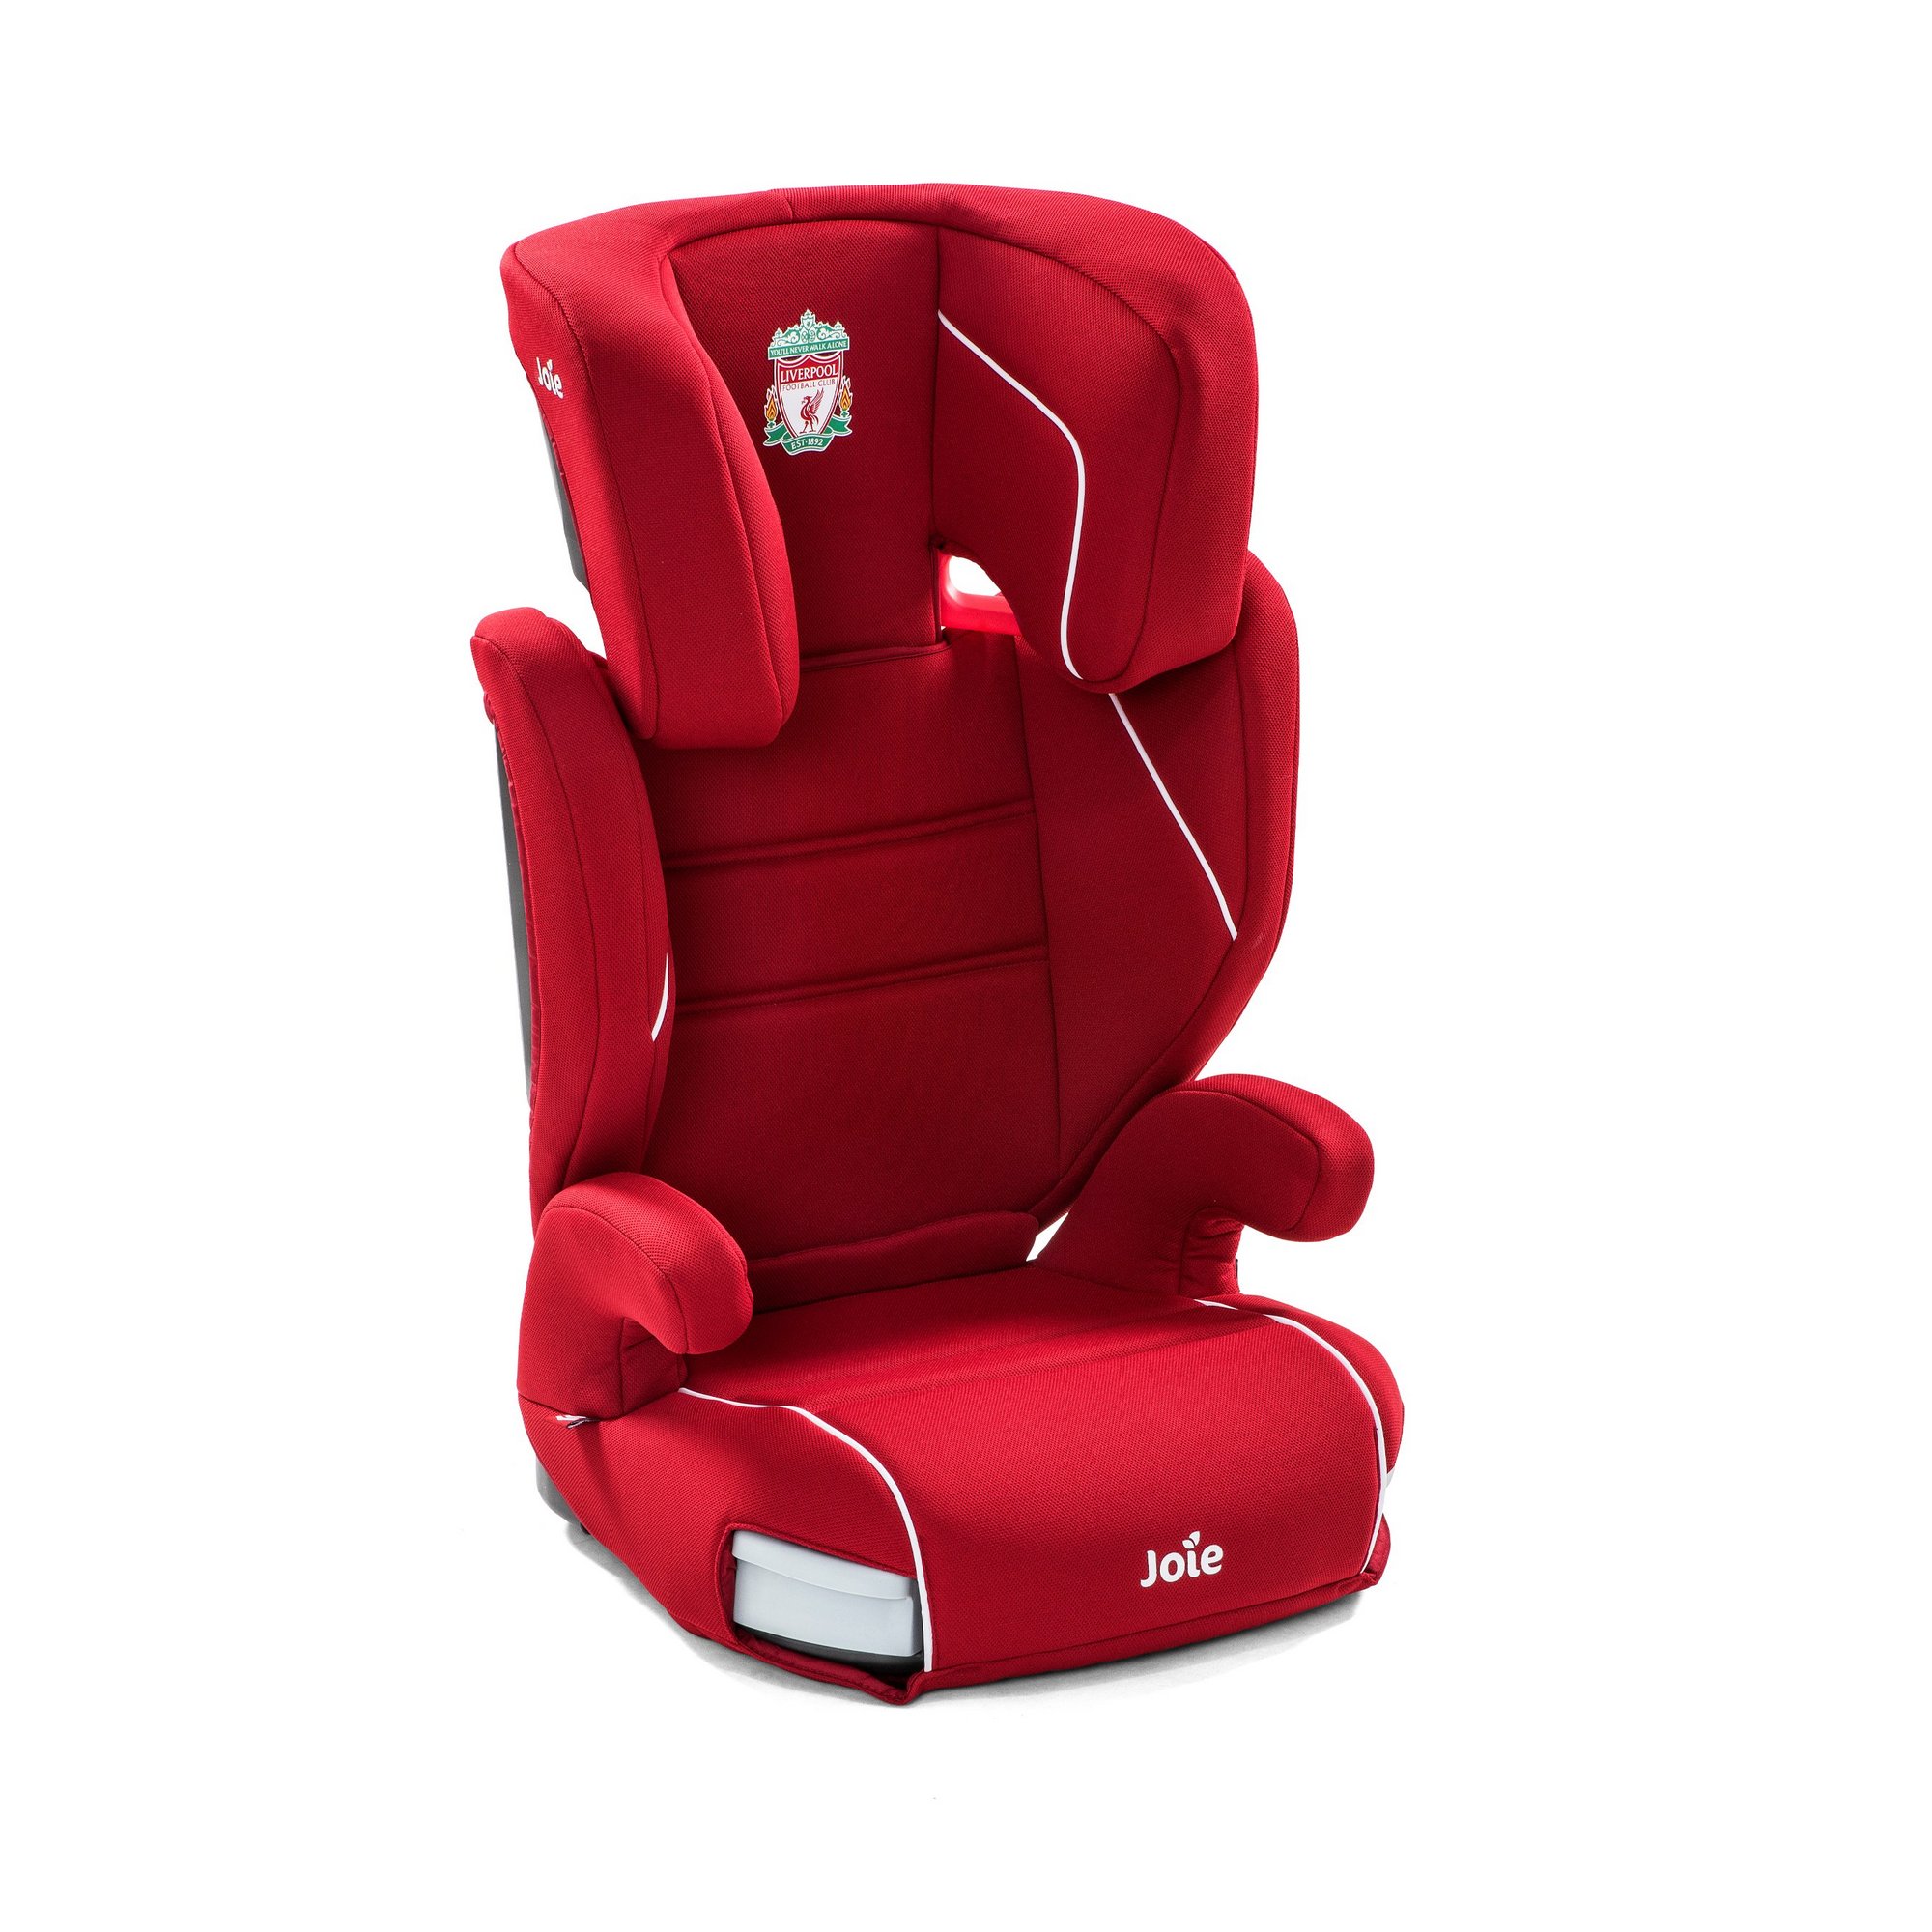 Joie Liverpool FC Red Crest Trillo Group 2/3 Car Seat